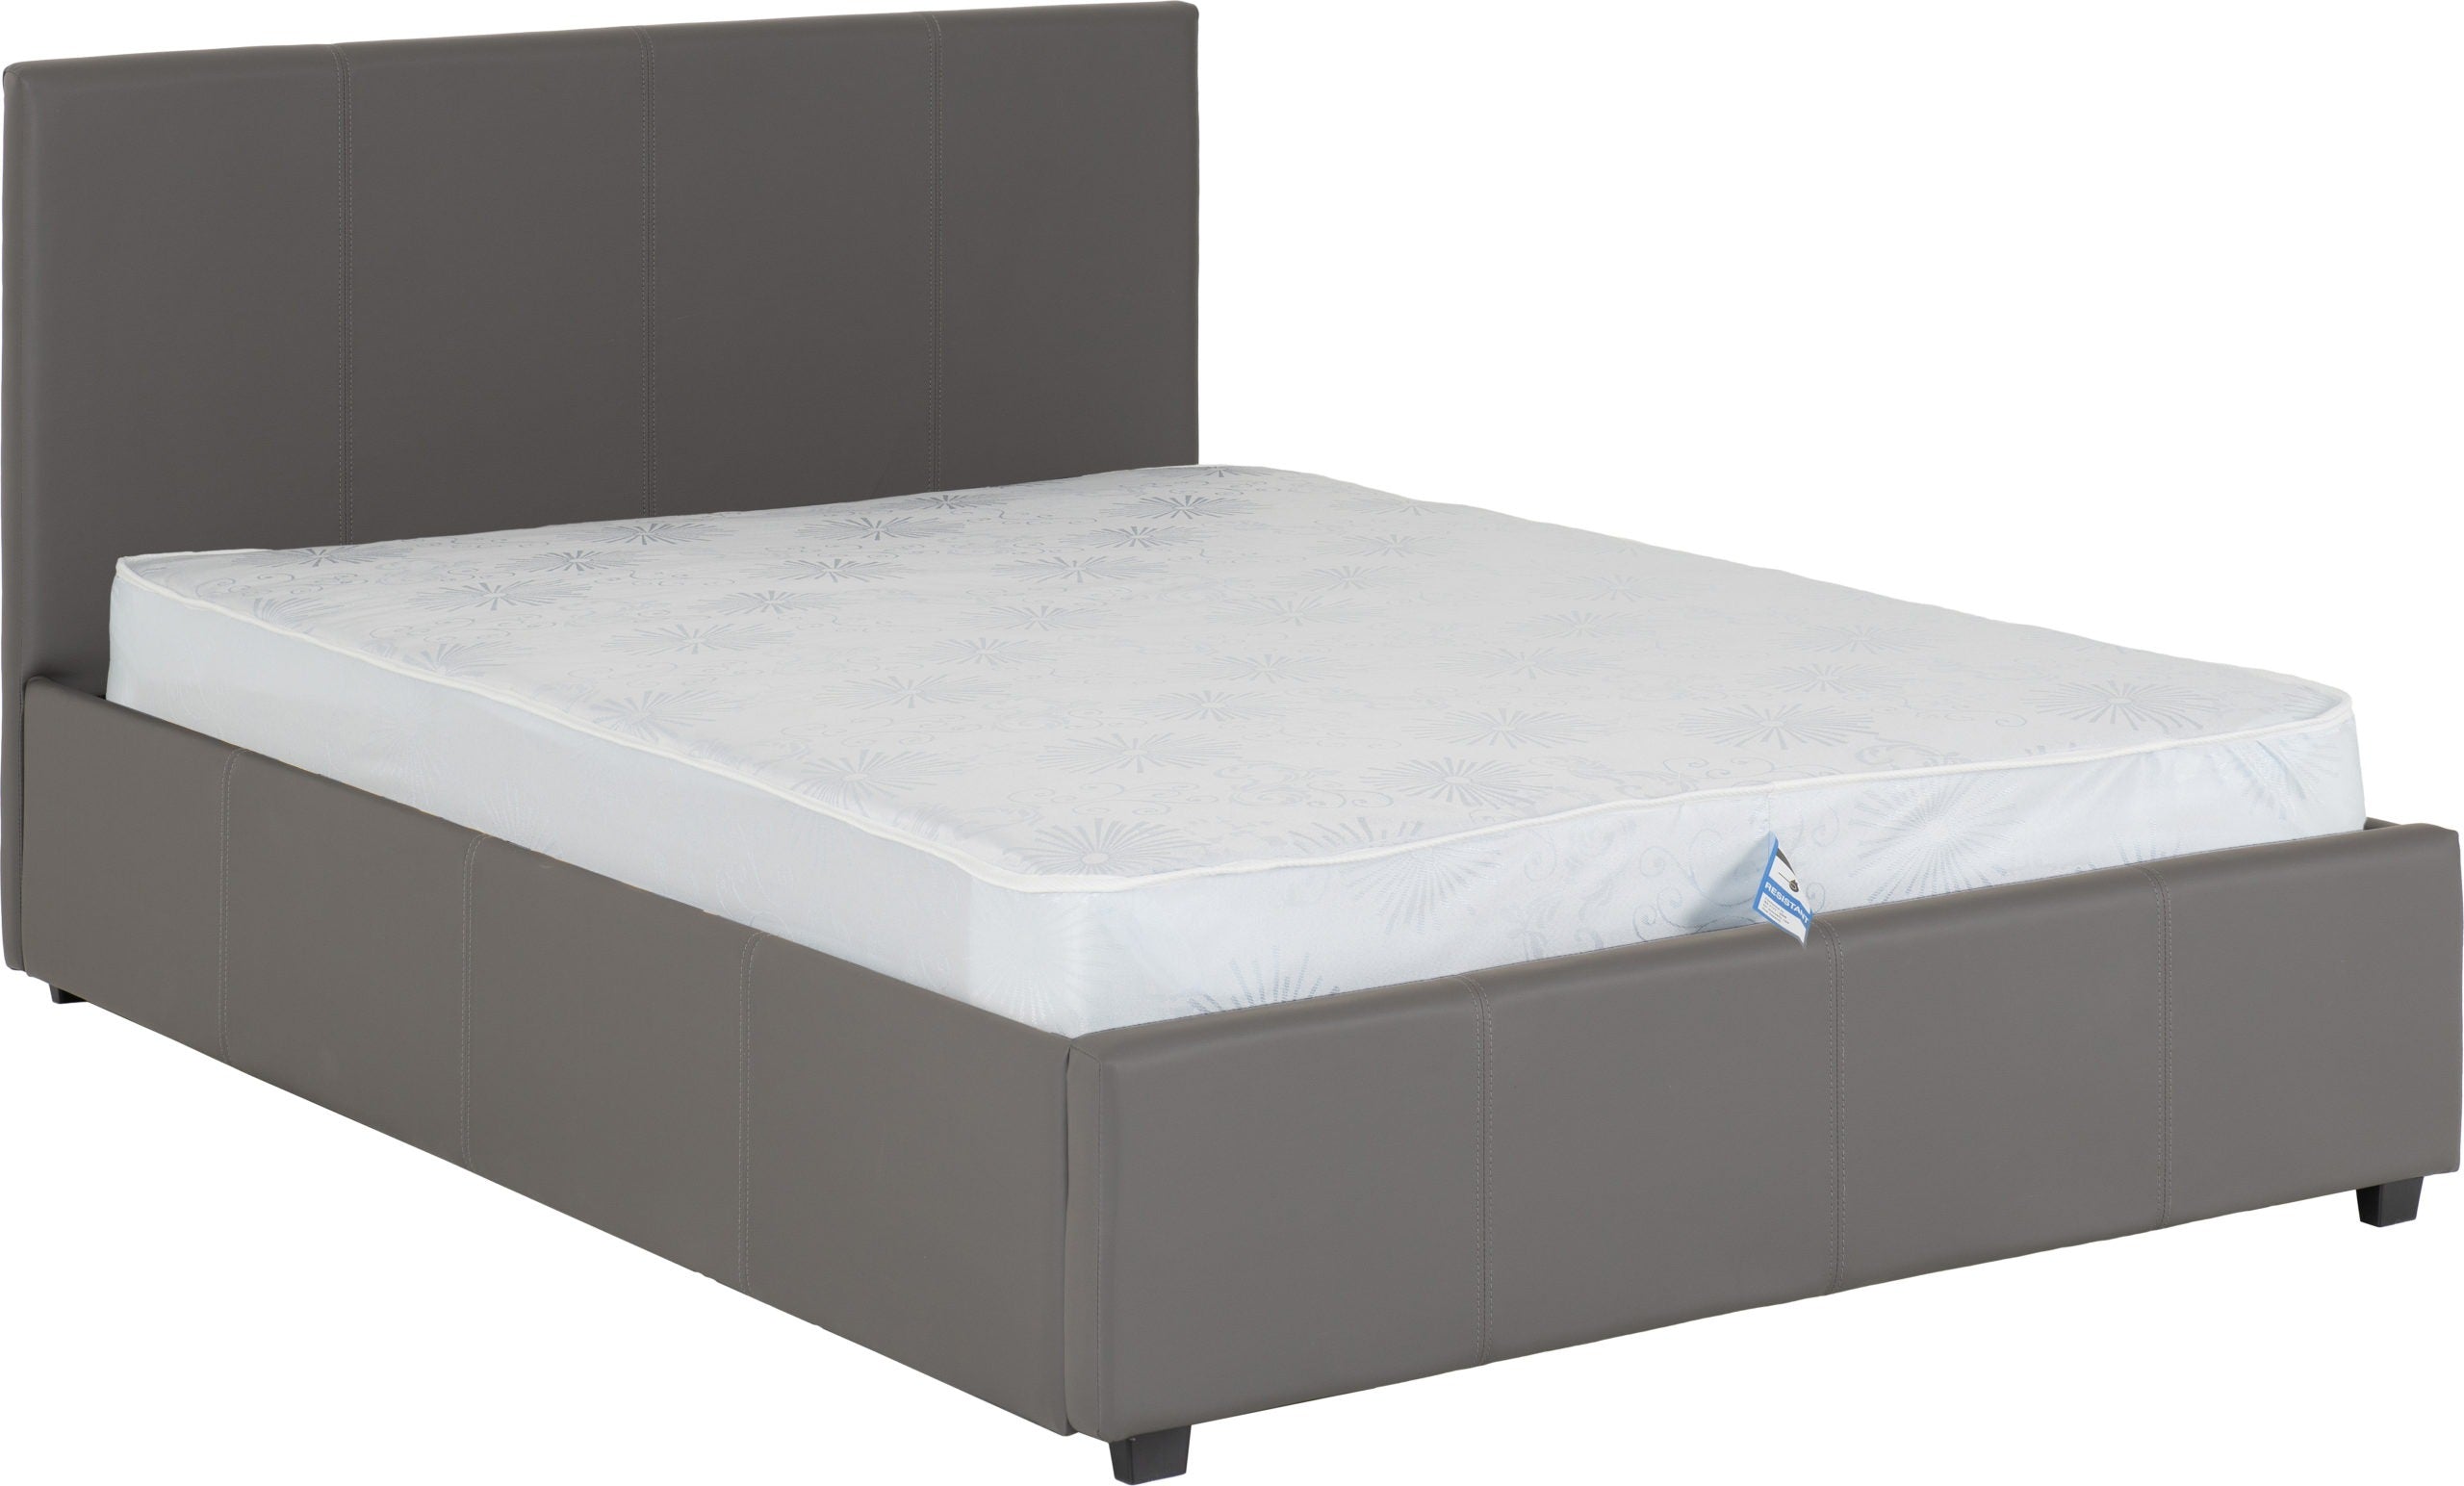 grey faux leather bed frame